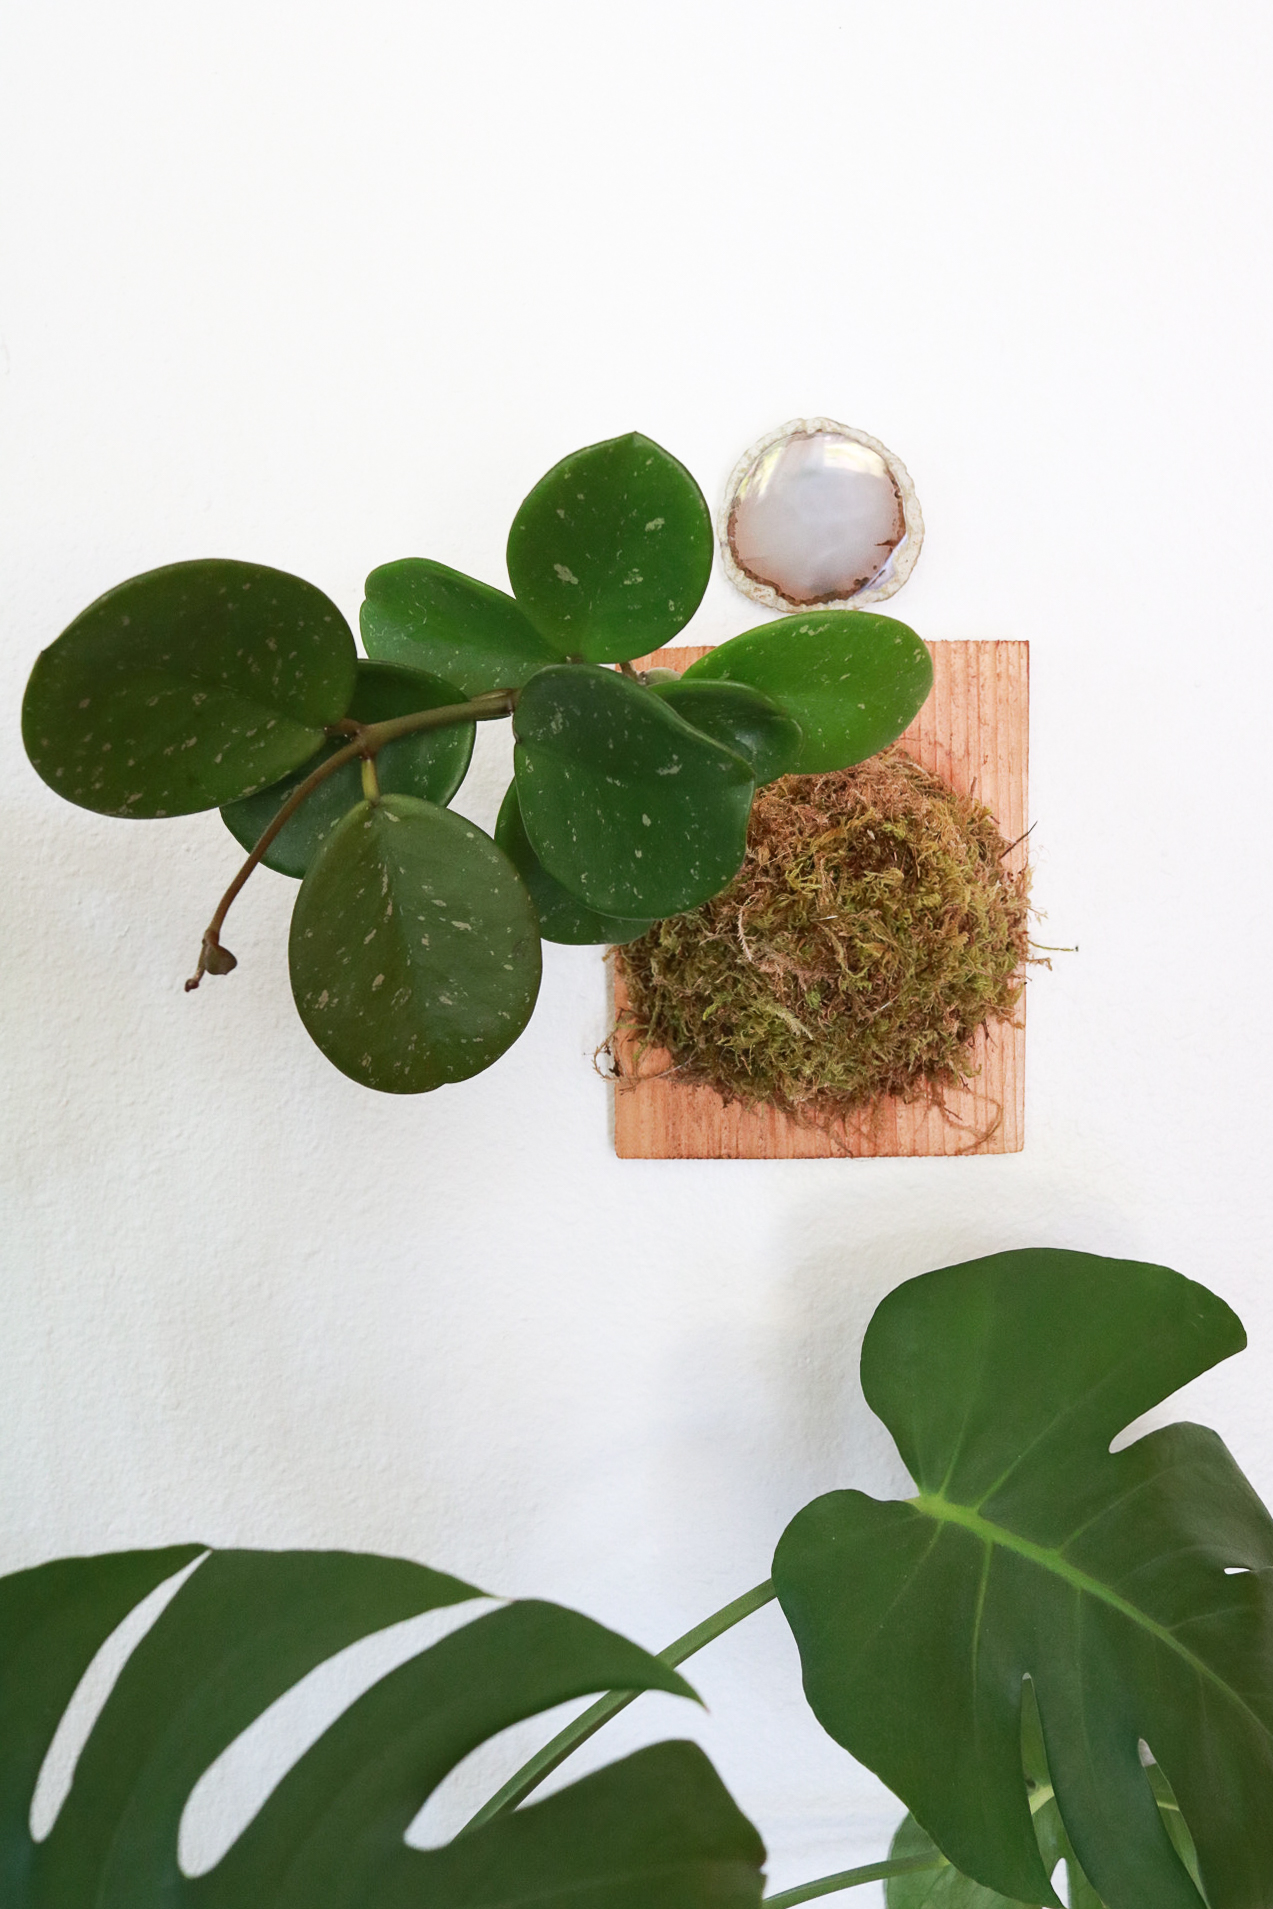 Learn how to care for Hoya plants. Everything you'll need to know from light, to soil, and how to water. Clever Bloom #hoya #houseplants